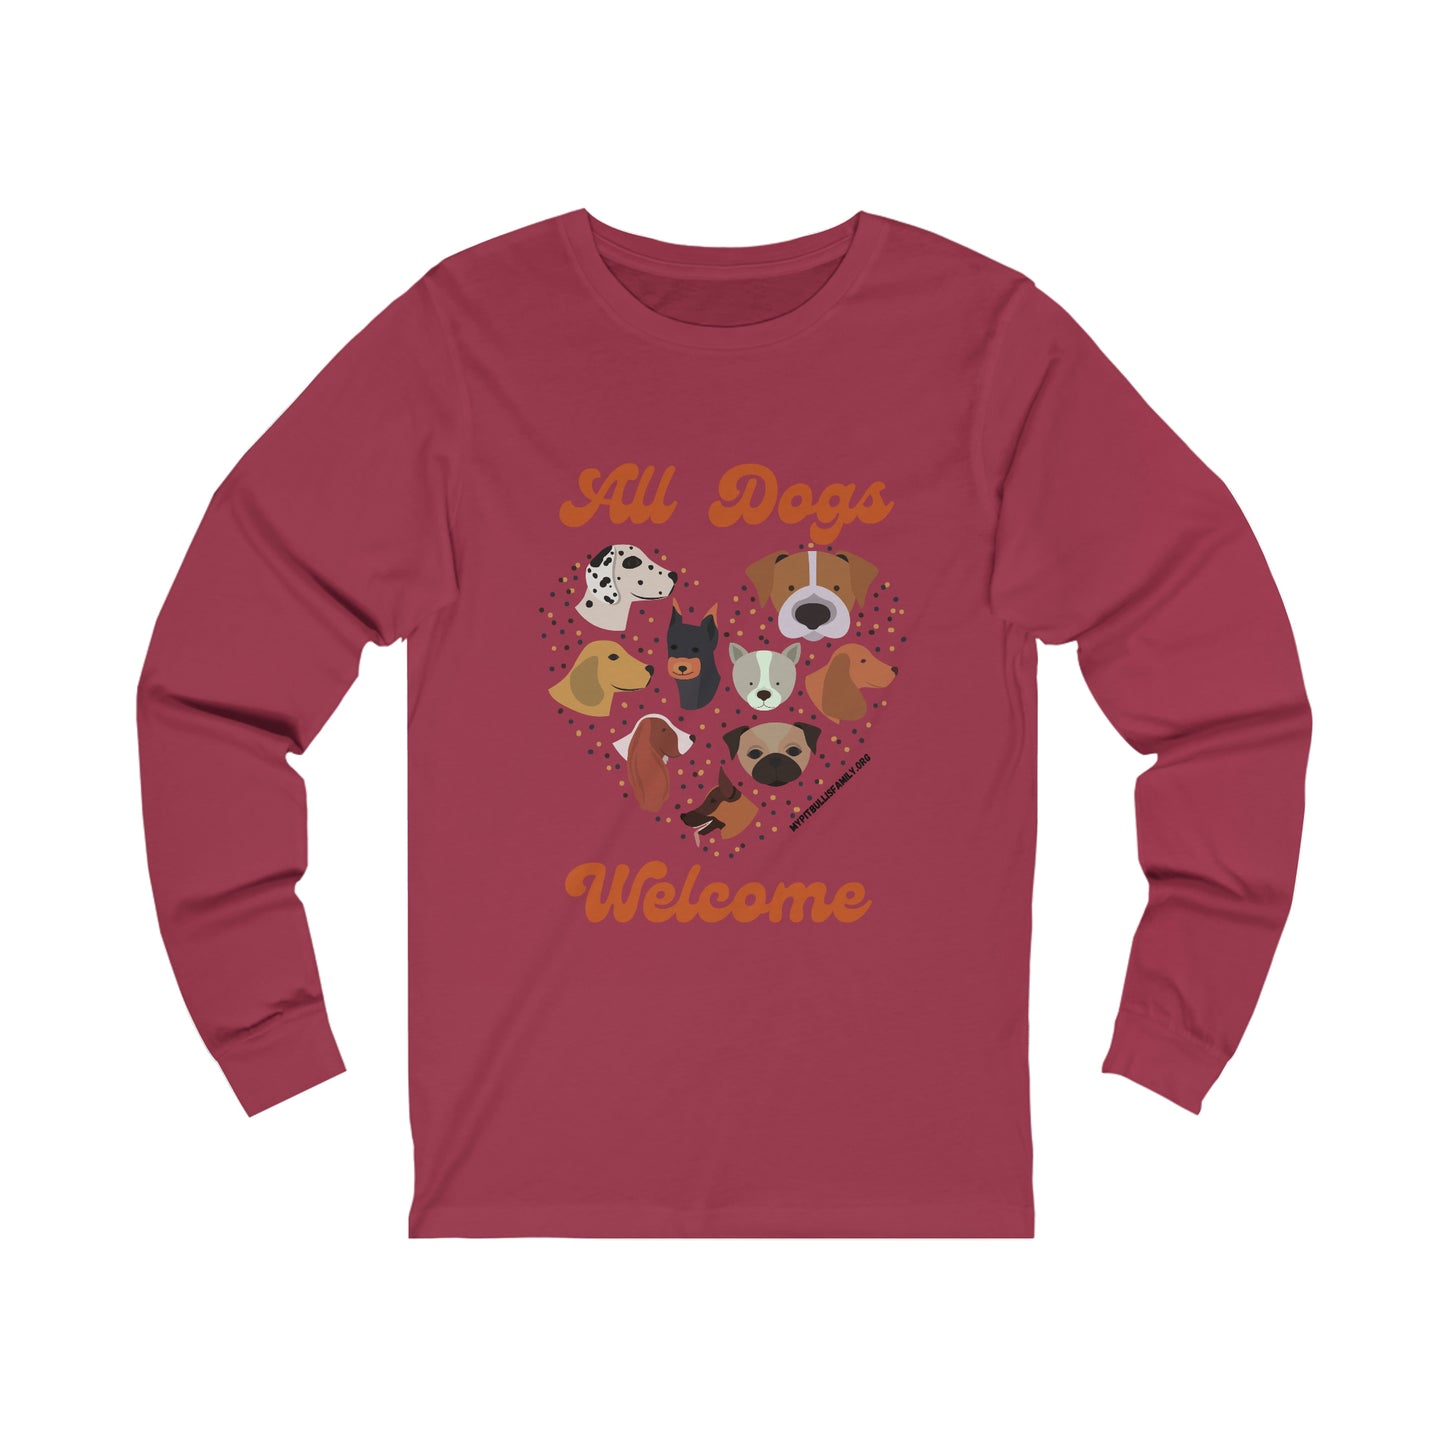 All Dogs Welcome Unisex Jersey Long Sleeve Tee